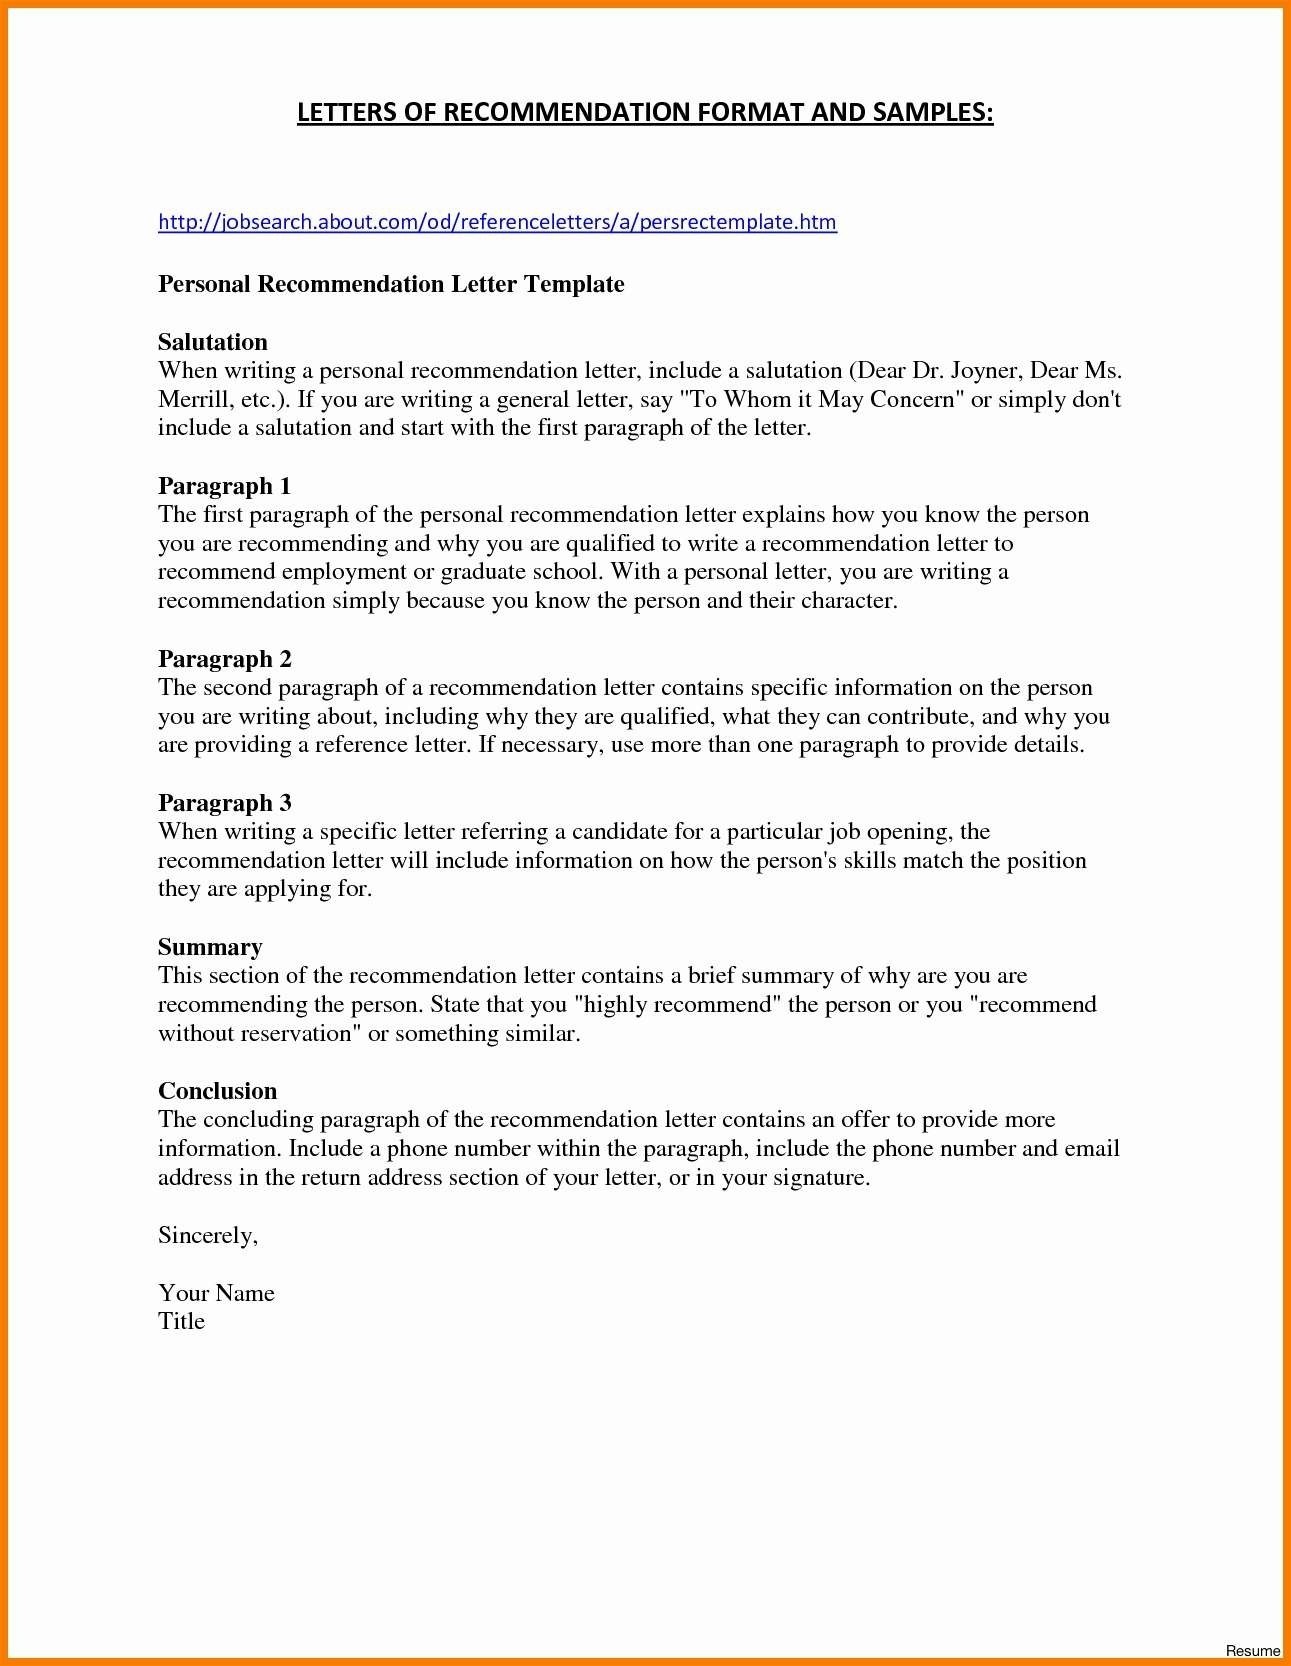 Recommendation Letter Format For Deck Cadet New Roof Certification Free